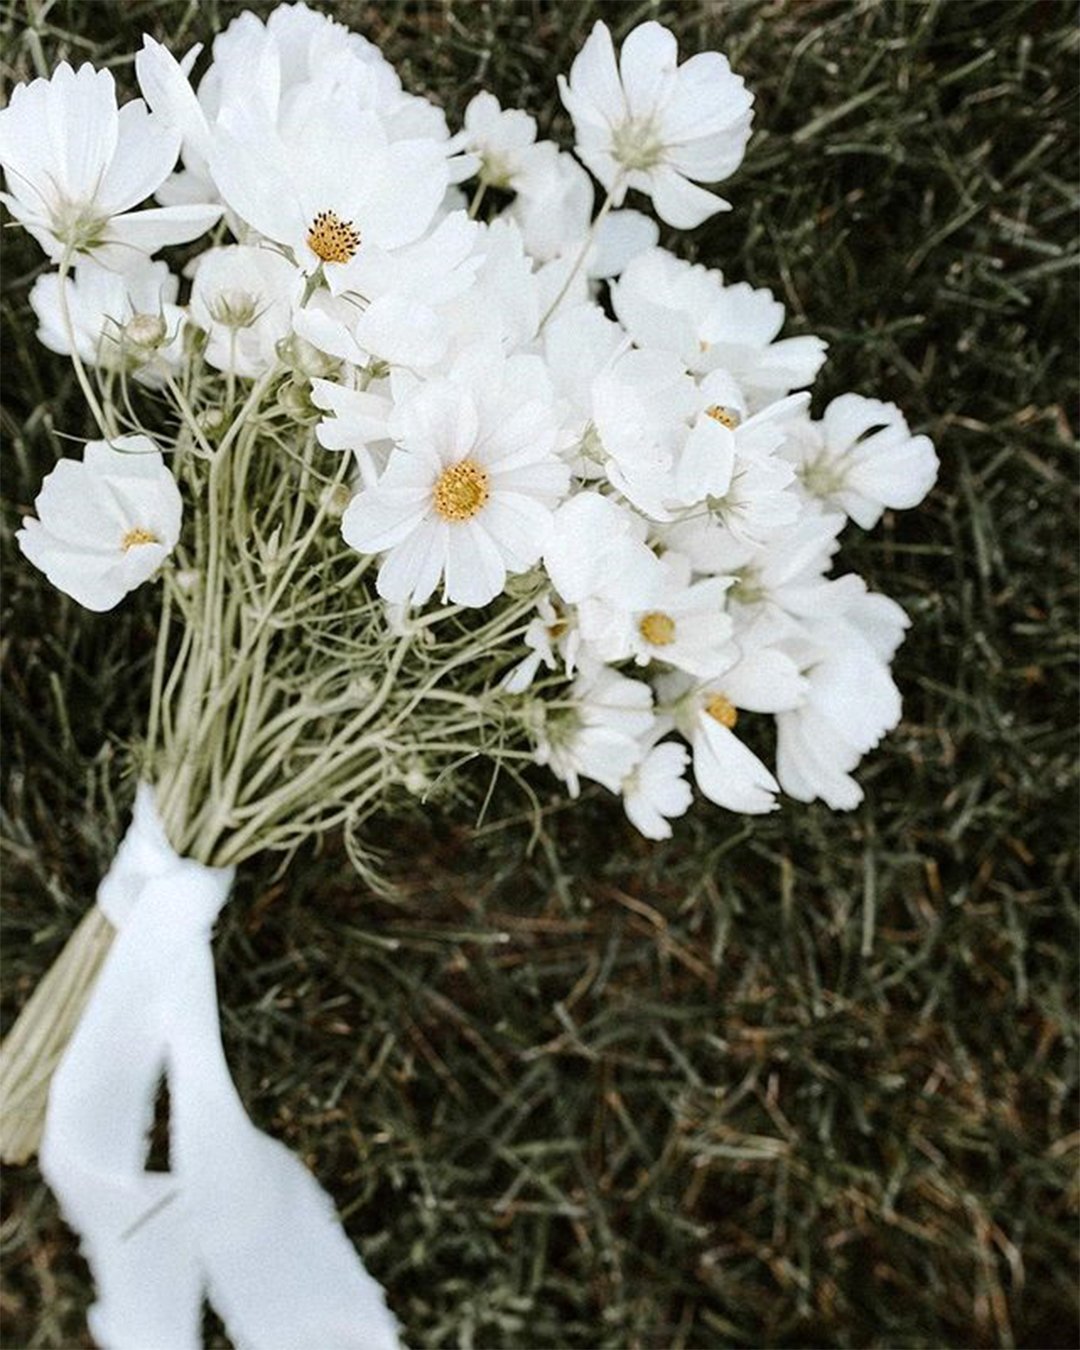 wildflower wedding bouquets with daisies